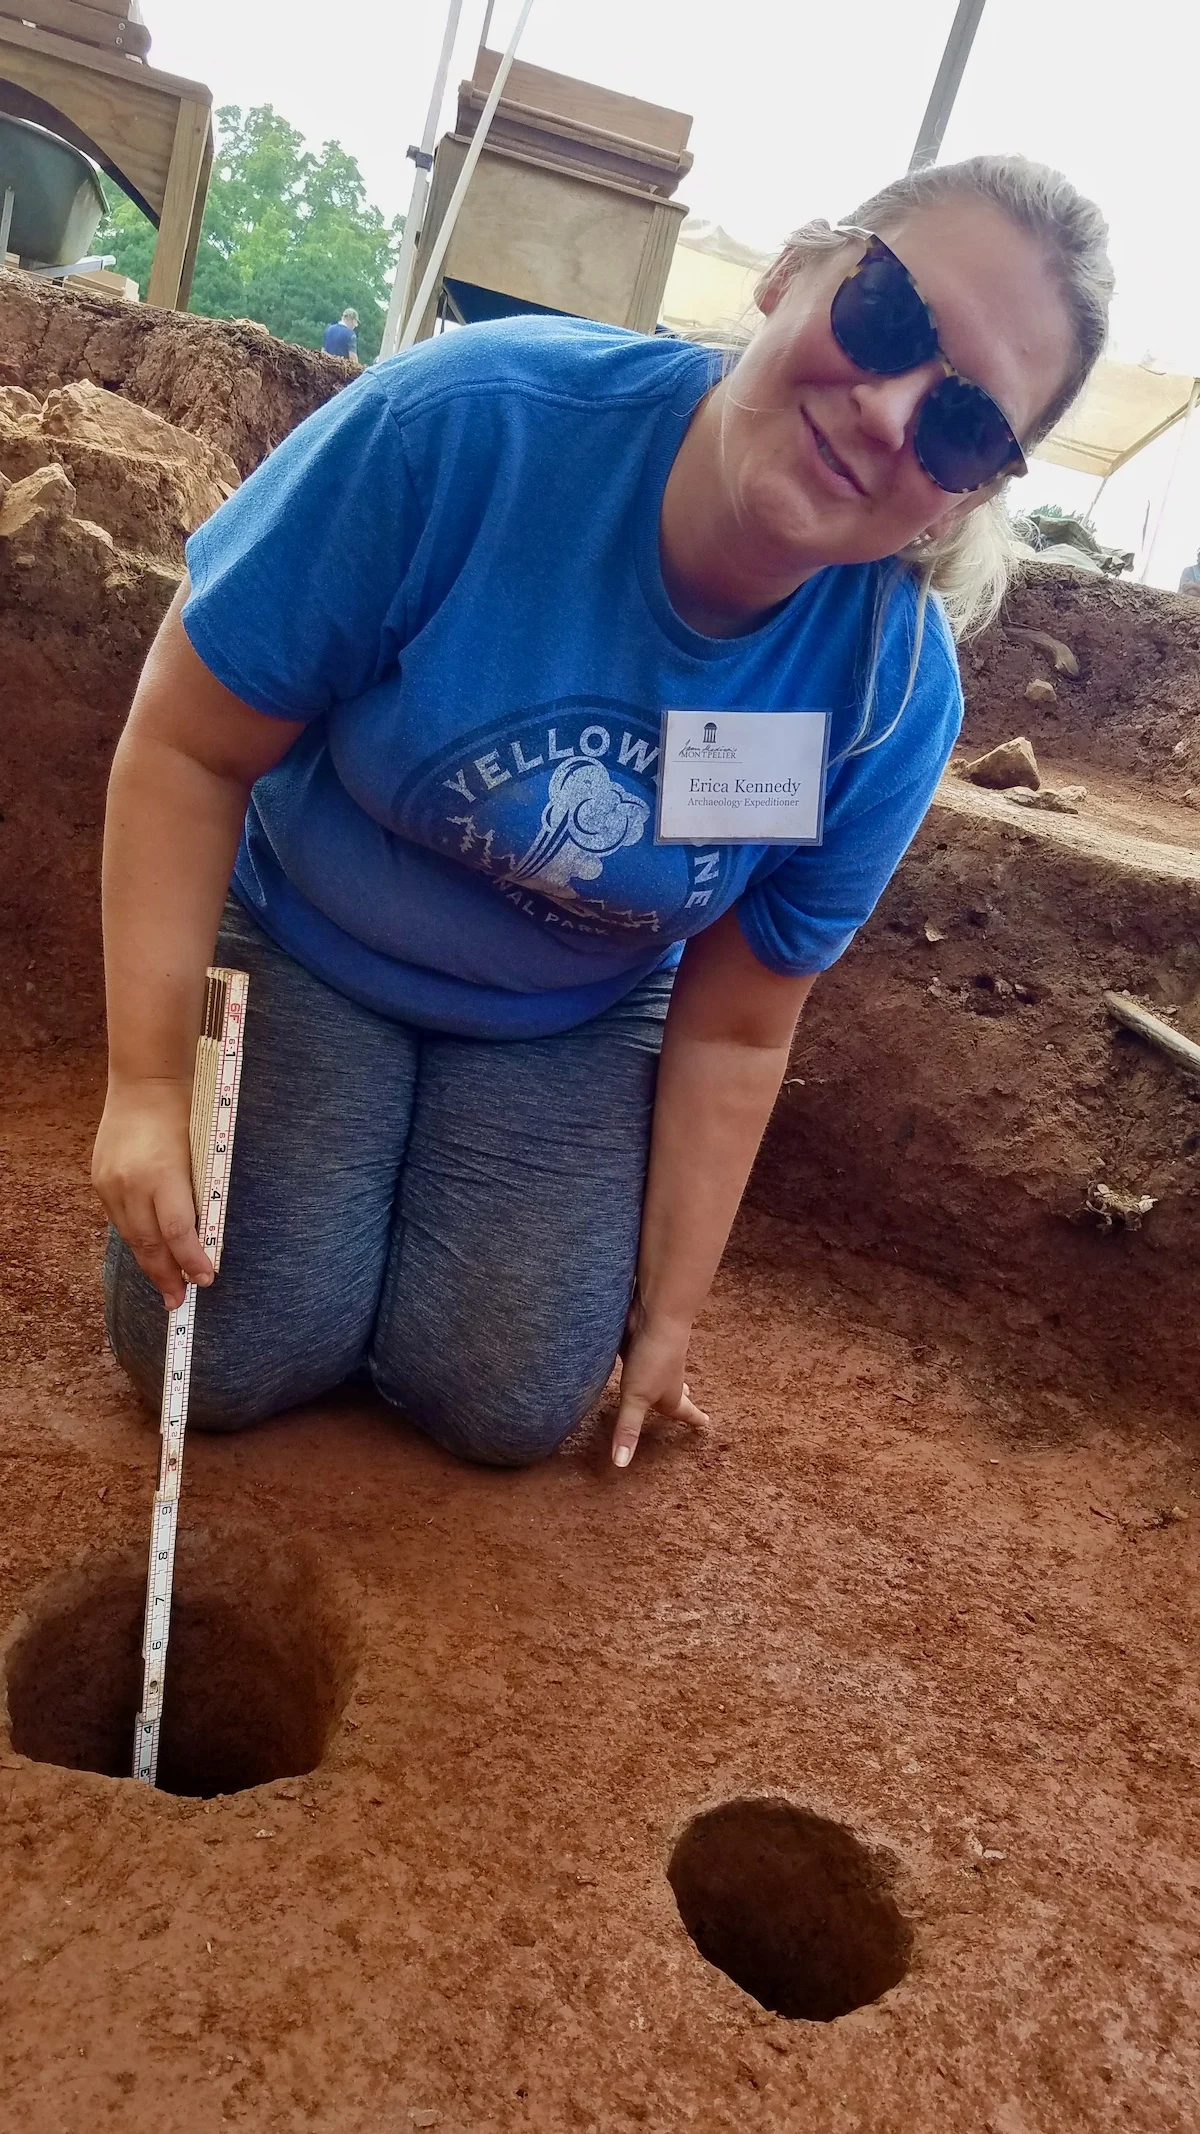 Measuring a feature. (A feature is an artifact that can't be brought back to the lab to interpret.) This is where one of the original trees were planted. A new silver pine will be planted soon to show what this part of the plantation looked like during James Madison's time.